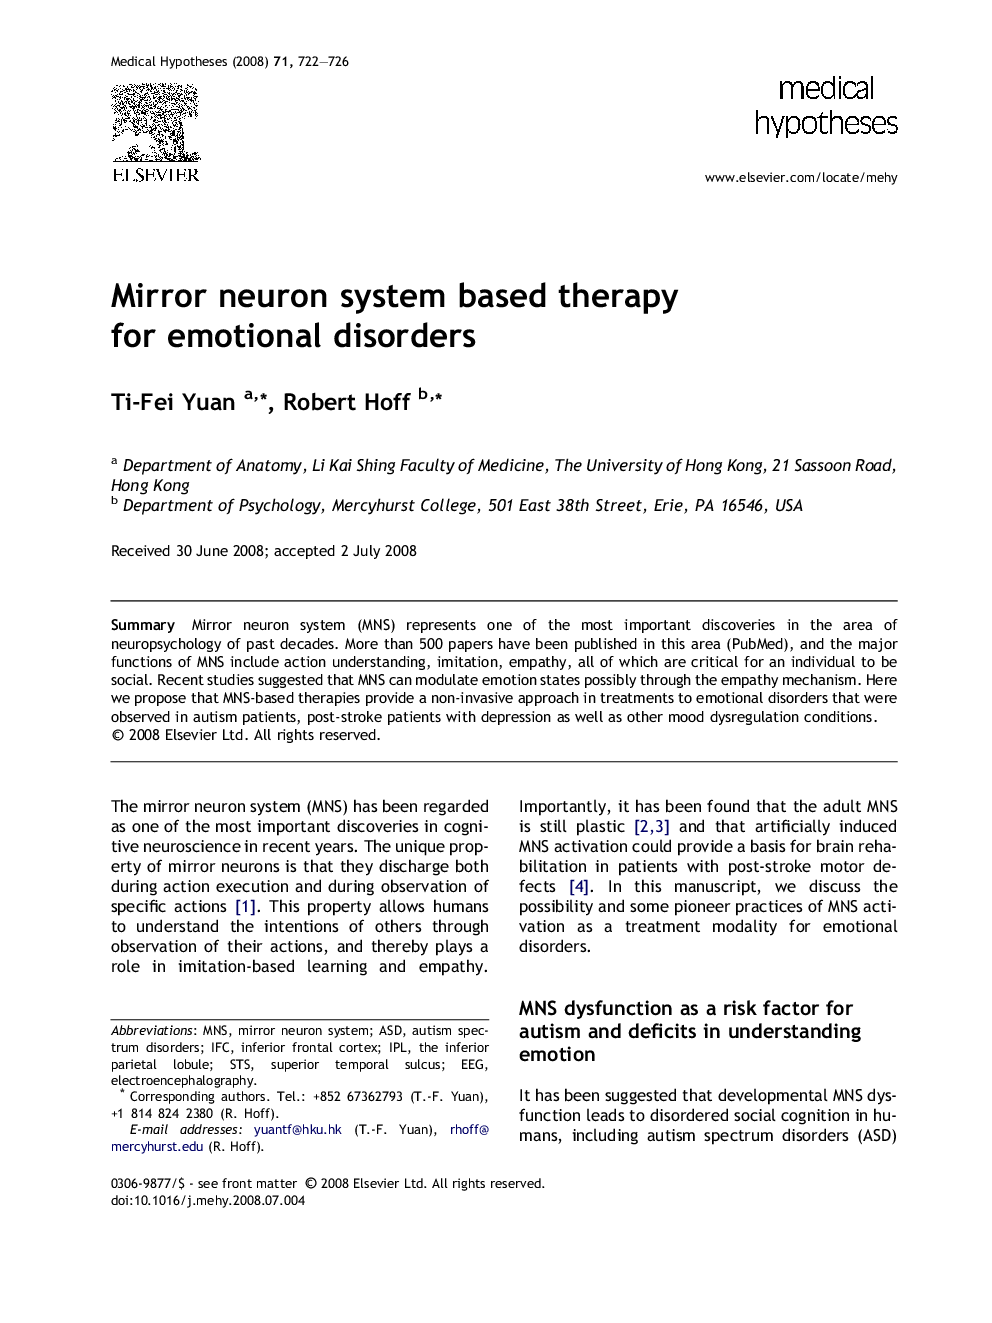 Mirror neuron system based therapy for emotional disorders